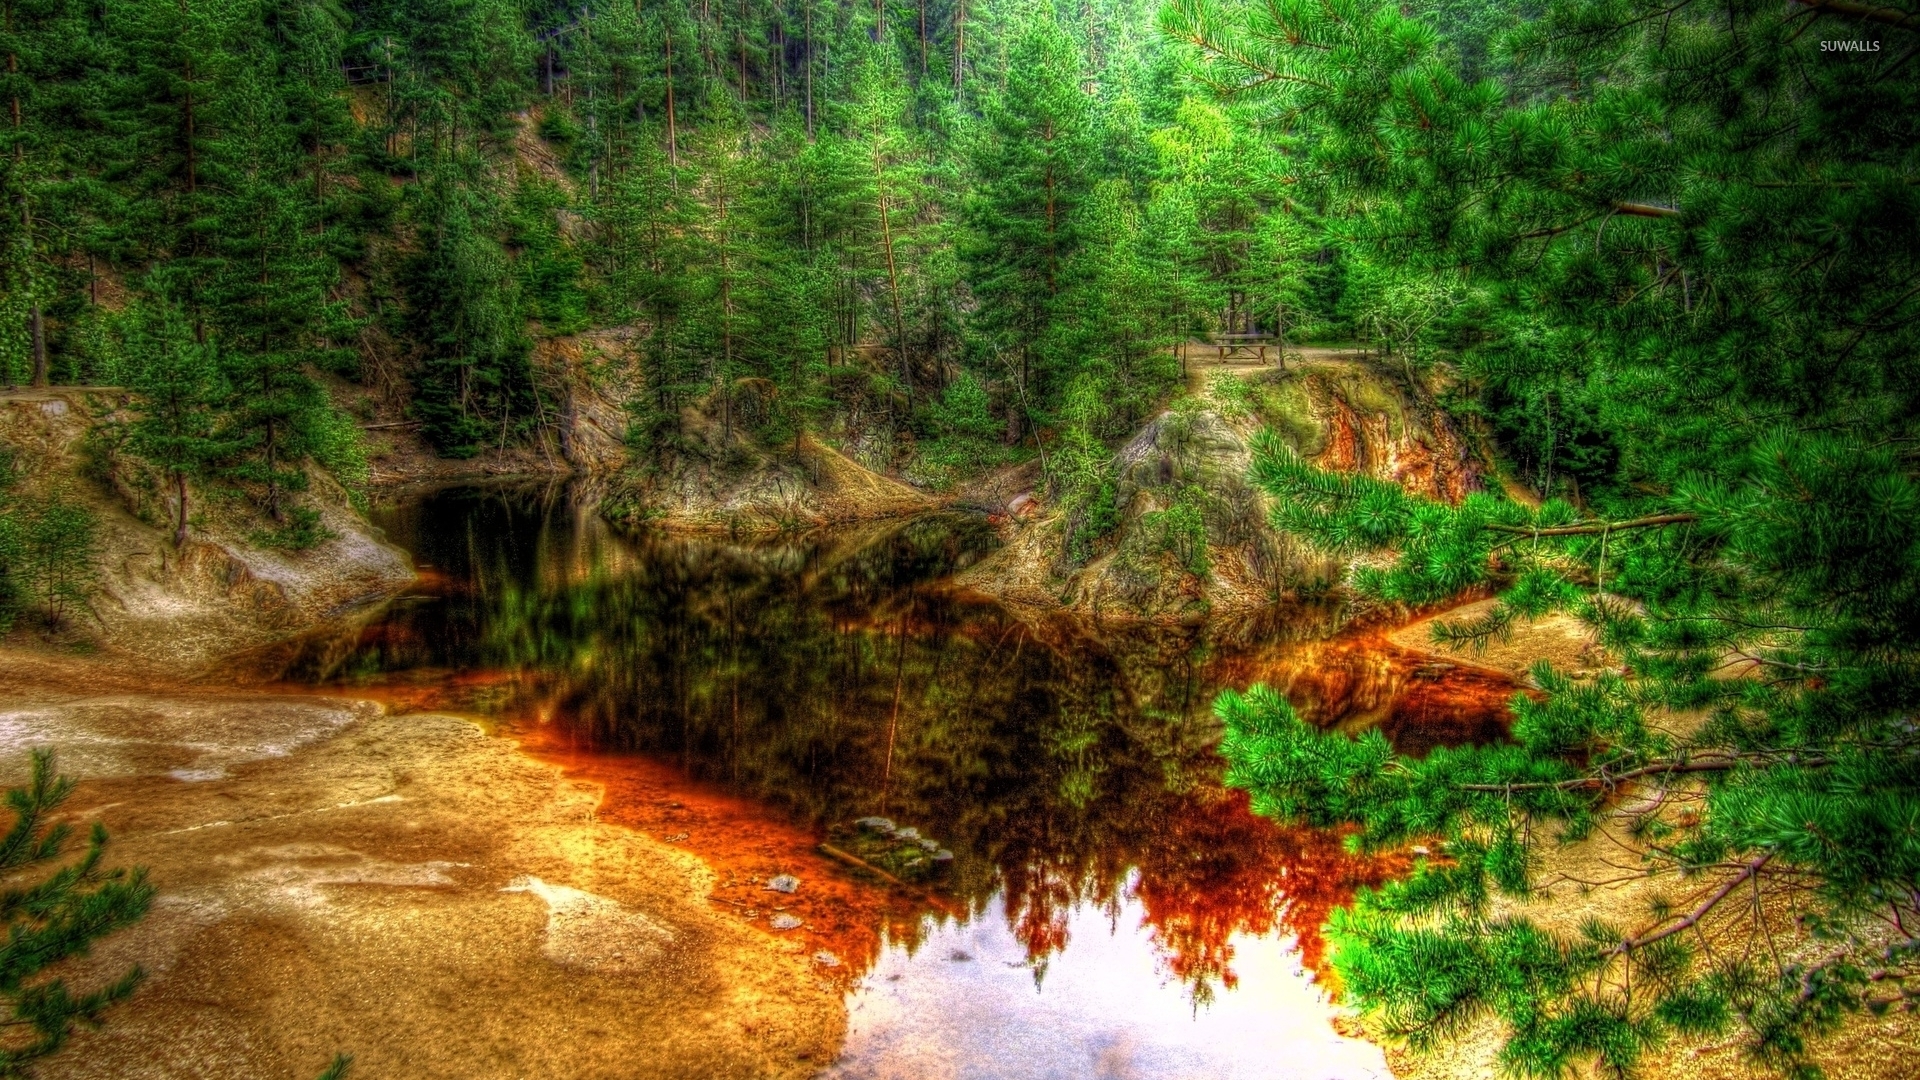 Rusty lake in the green forest wallpaper - Nature wallpapers - #36815